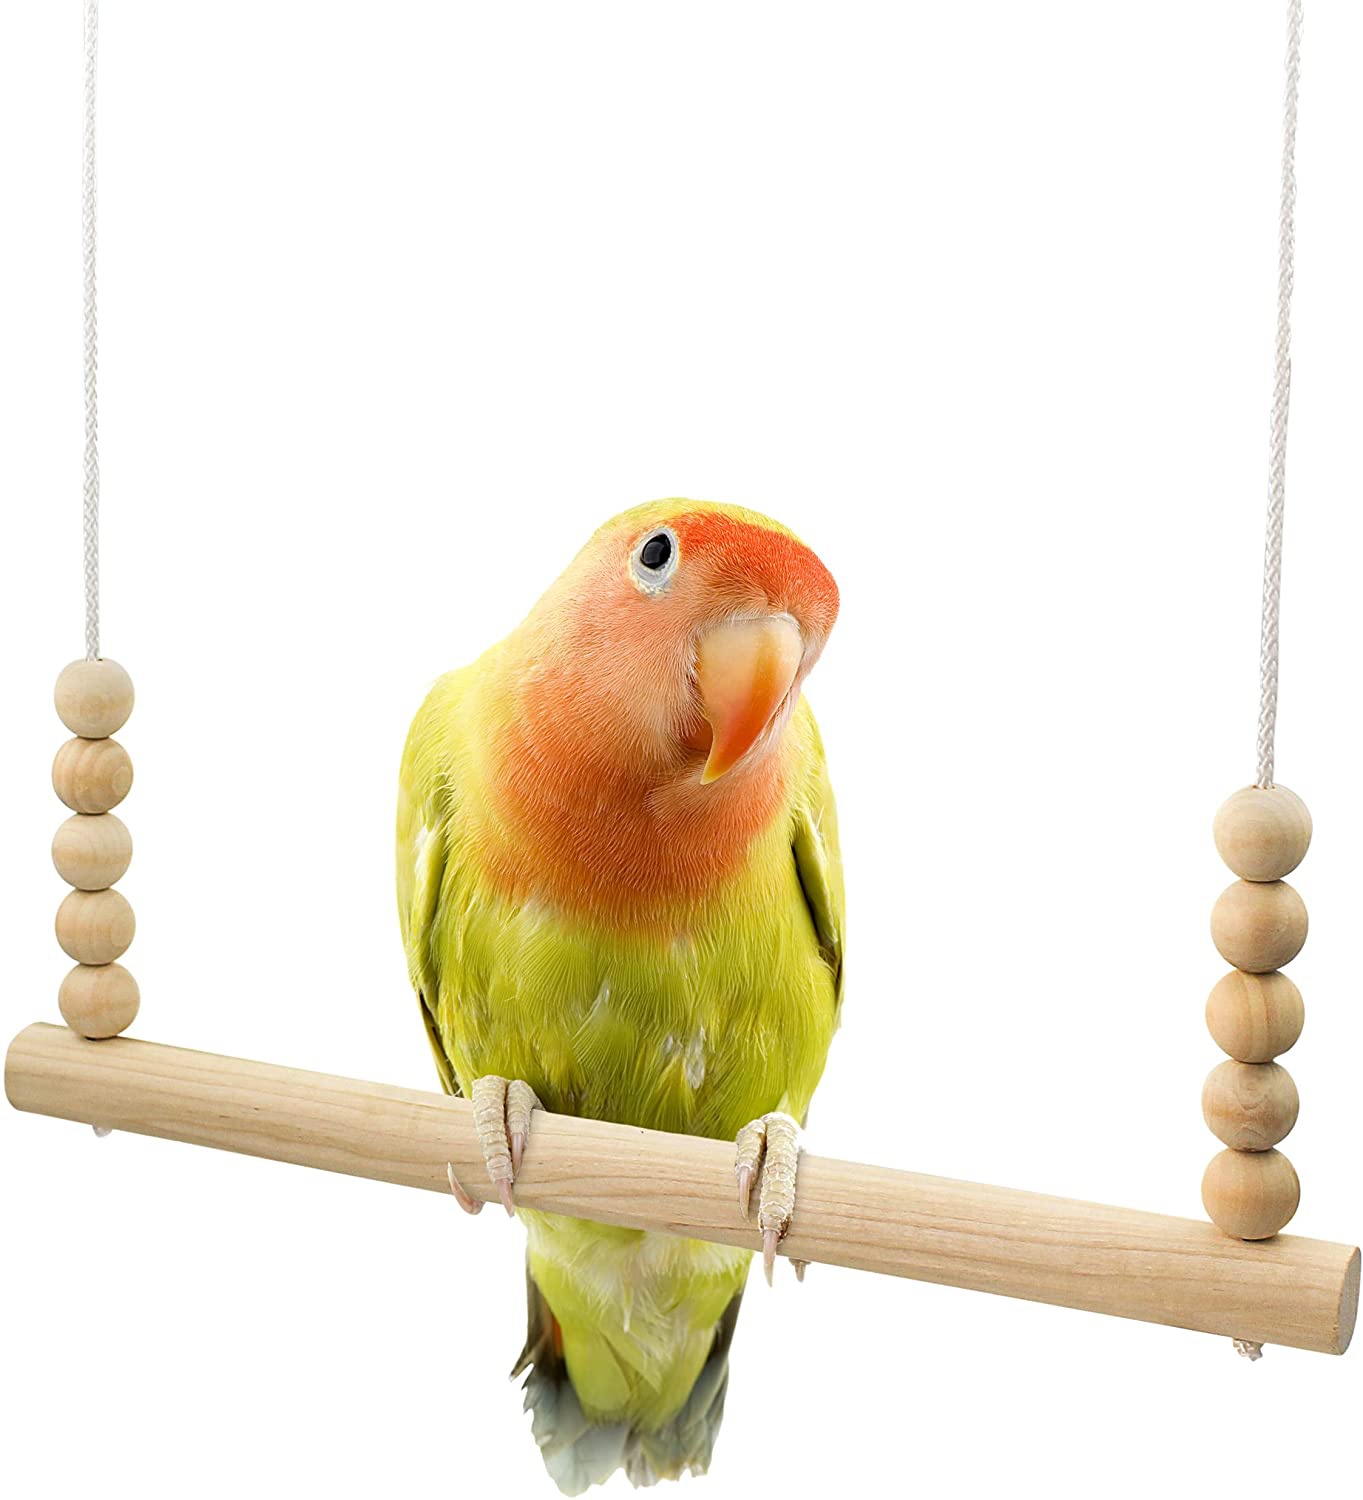 Backyard Barnyard Chicken Swing Toy for Coop (Round Bar) Handmade in USA! Natural Safe Large Wood Perch Ladder for Poultry Run Rooster Hens Chicks Pet Parrots Pollo Stress Relief for Birds